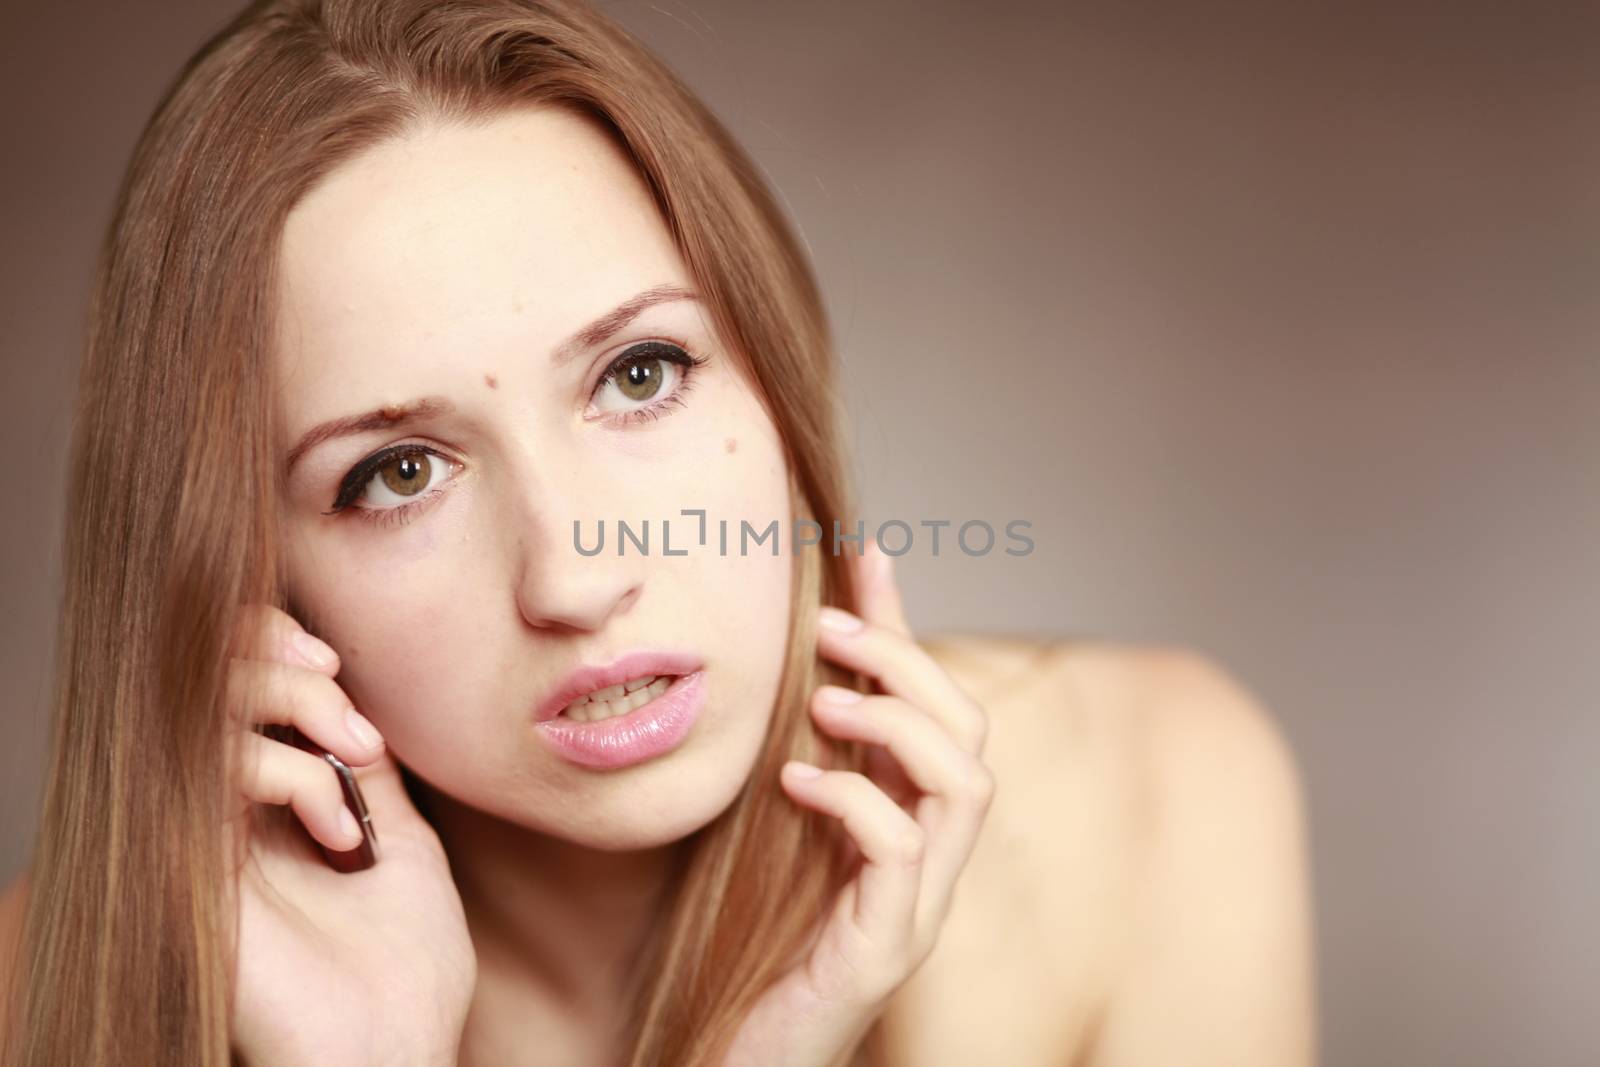 The beautiful girl is talking on the mobile phone. Girl portrait. Woman portrait.